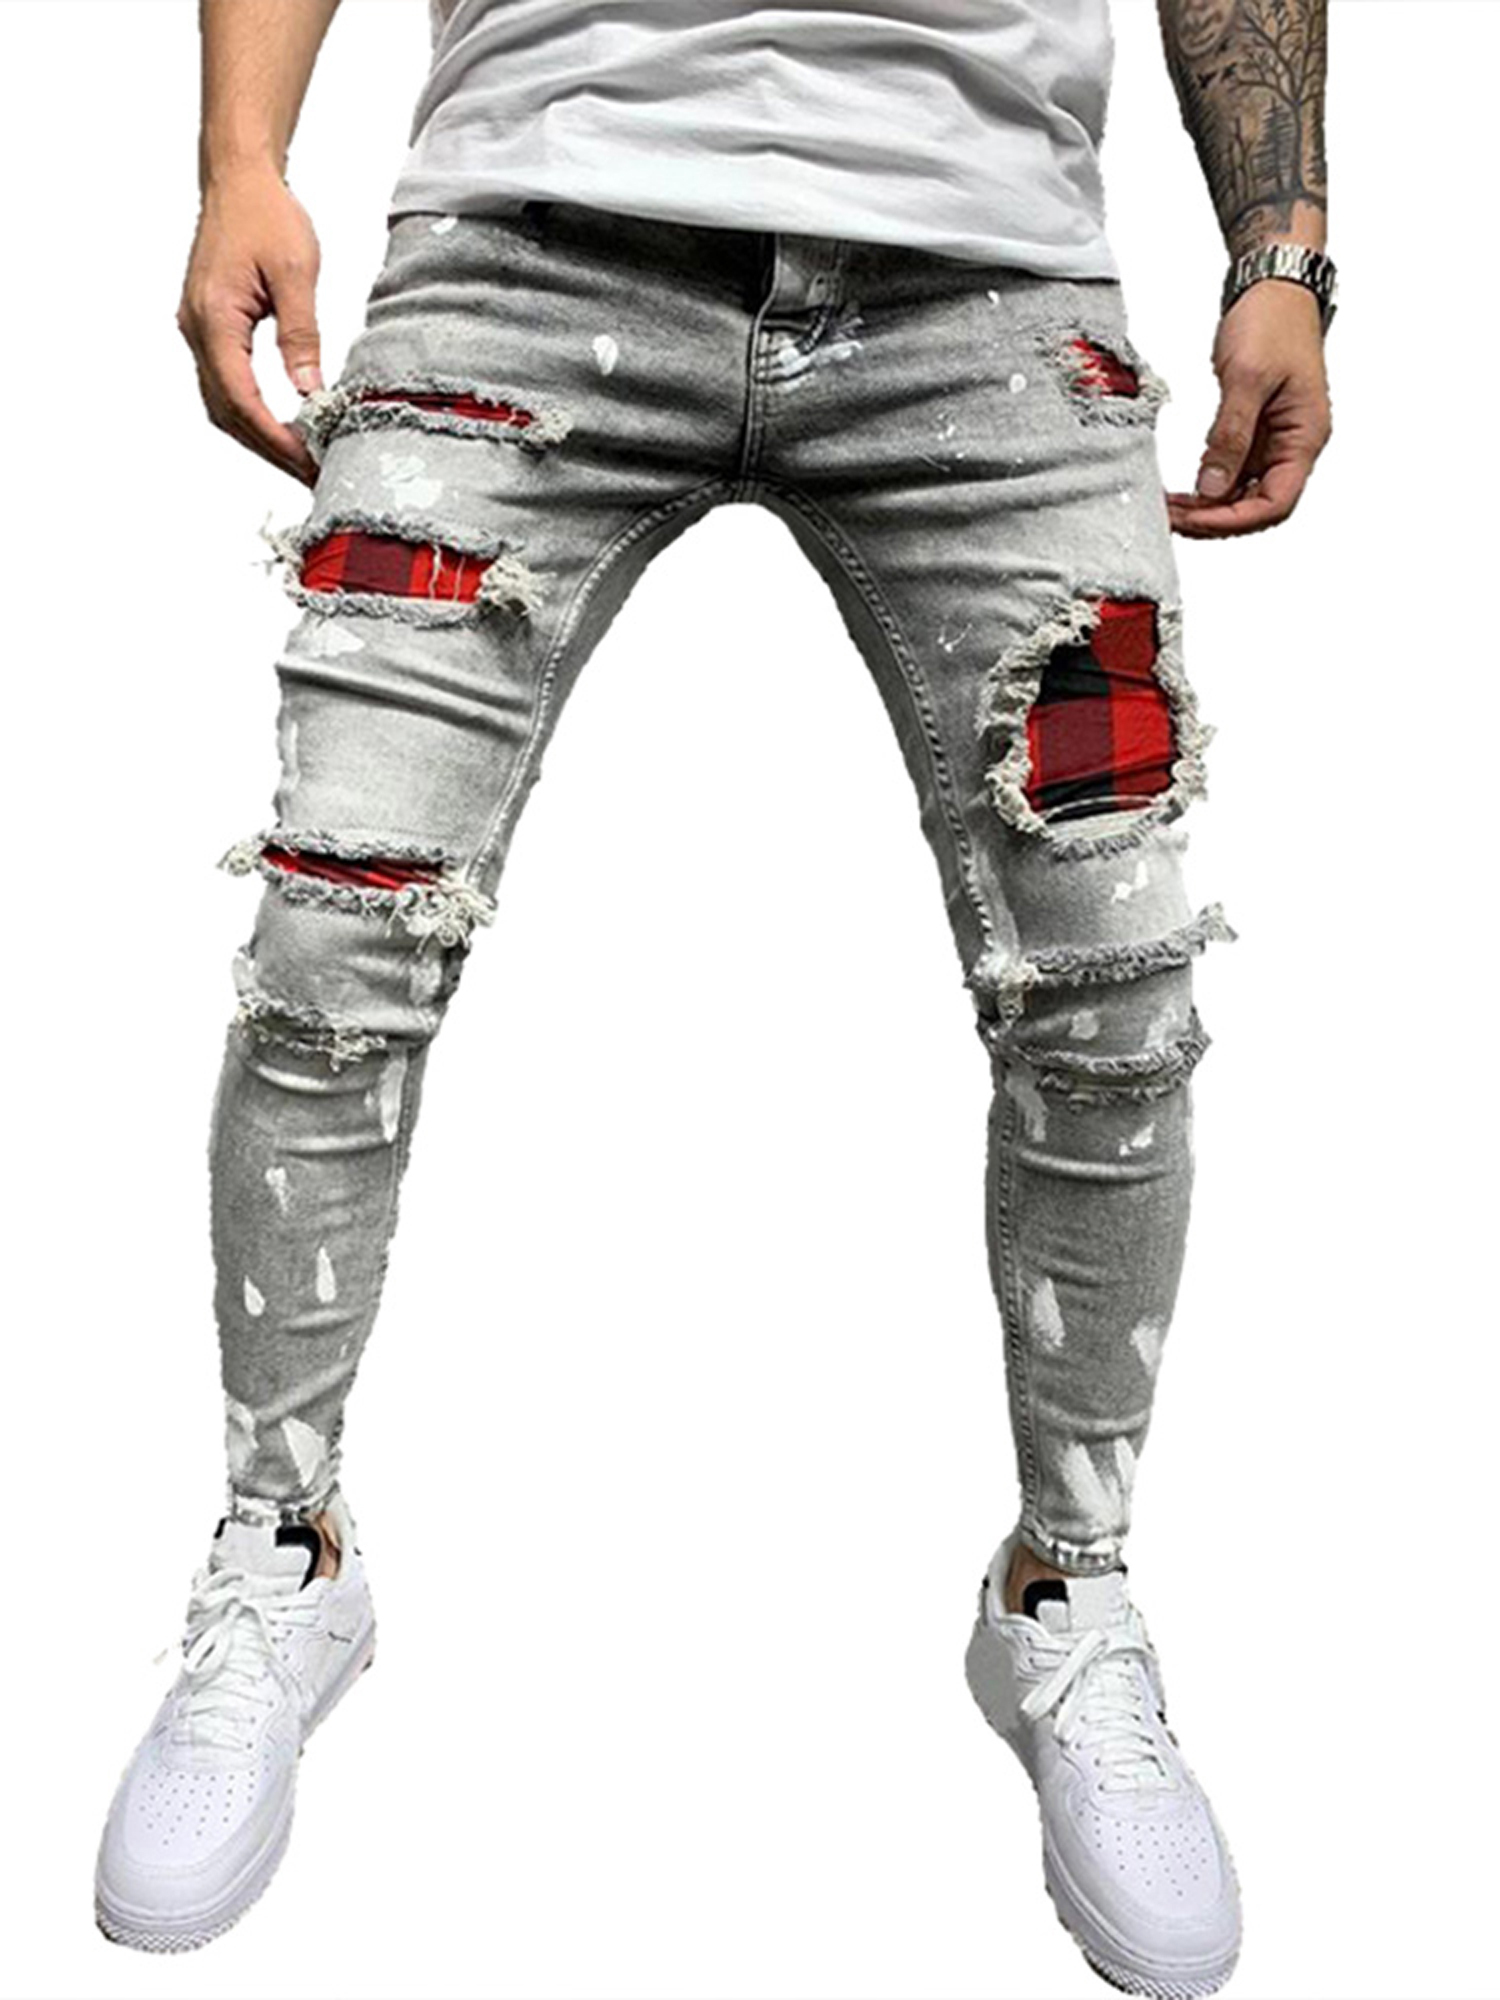 34,Navy Blue Men's Printed Jeans Street Wear Destroyed Distressed Stylish Slim Fit Denim Pants Casual Skinny Stretch Jean Trousers 